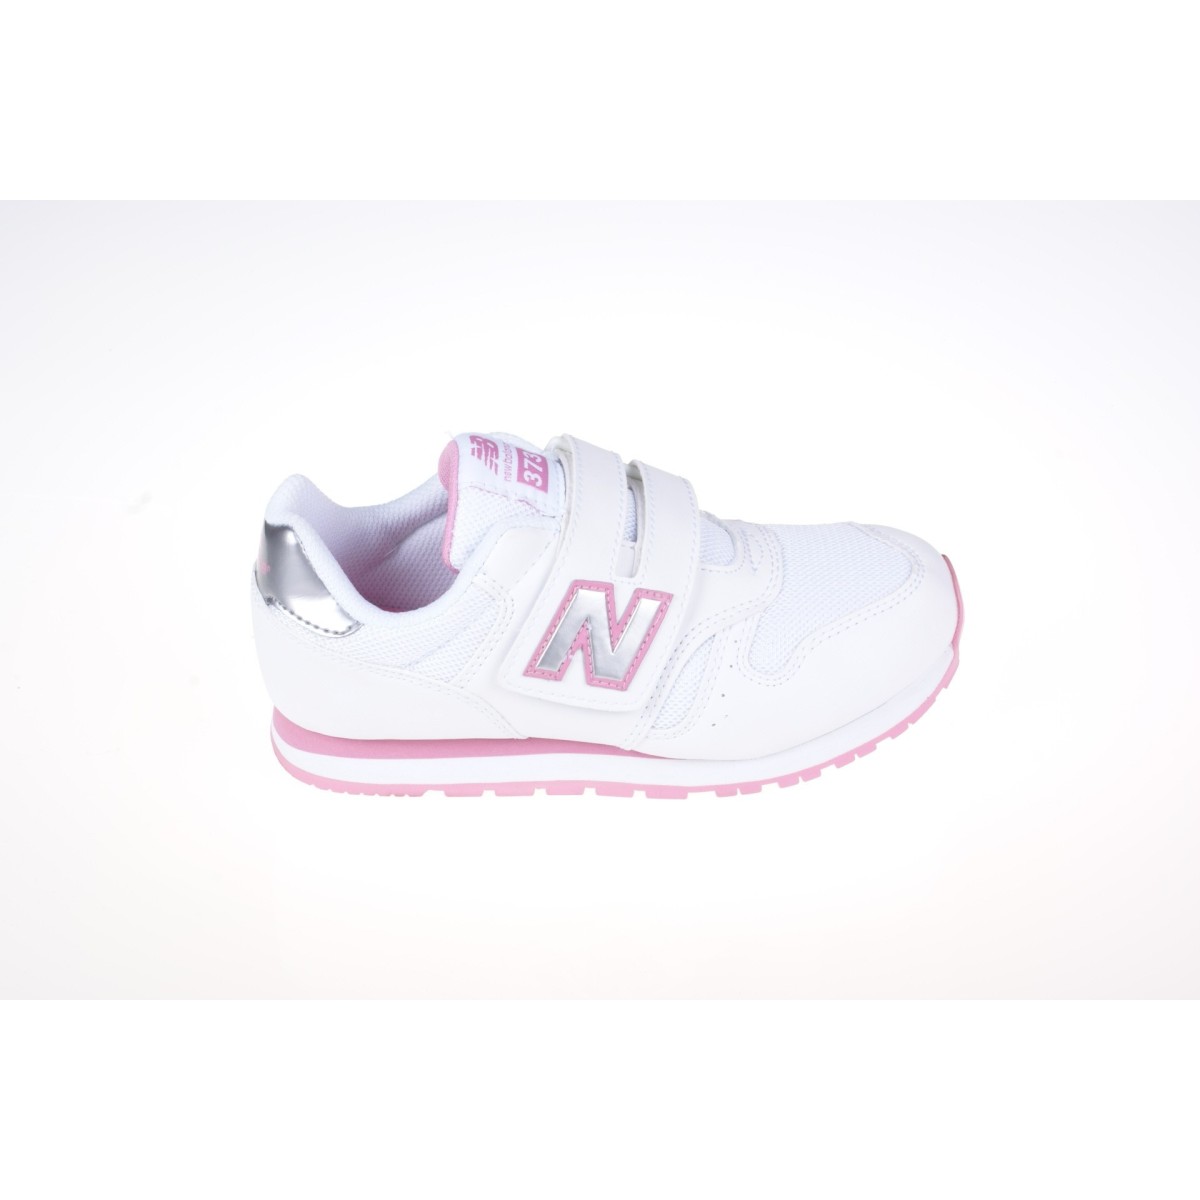 levend stam Controverse Footwear New Balance KV 373 WPY shoes